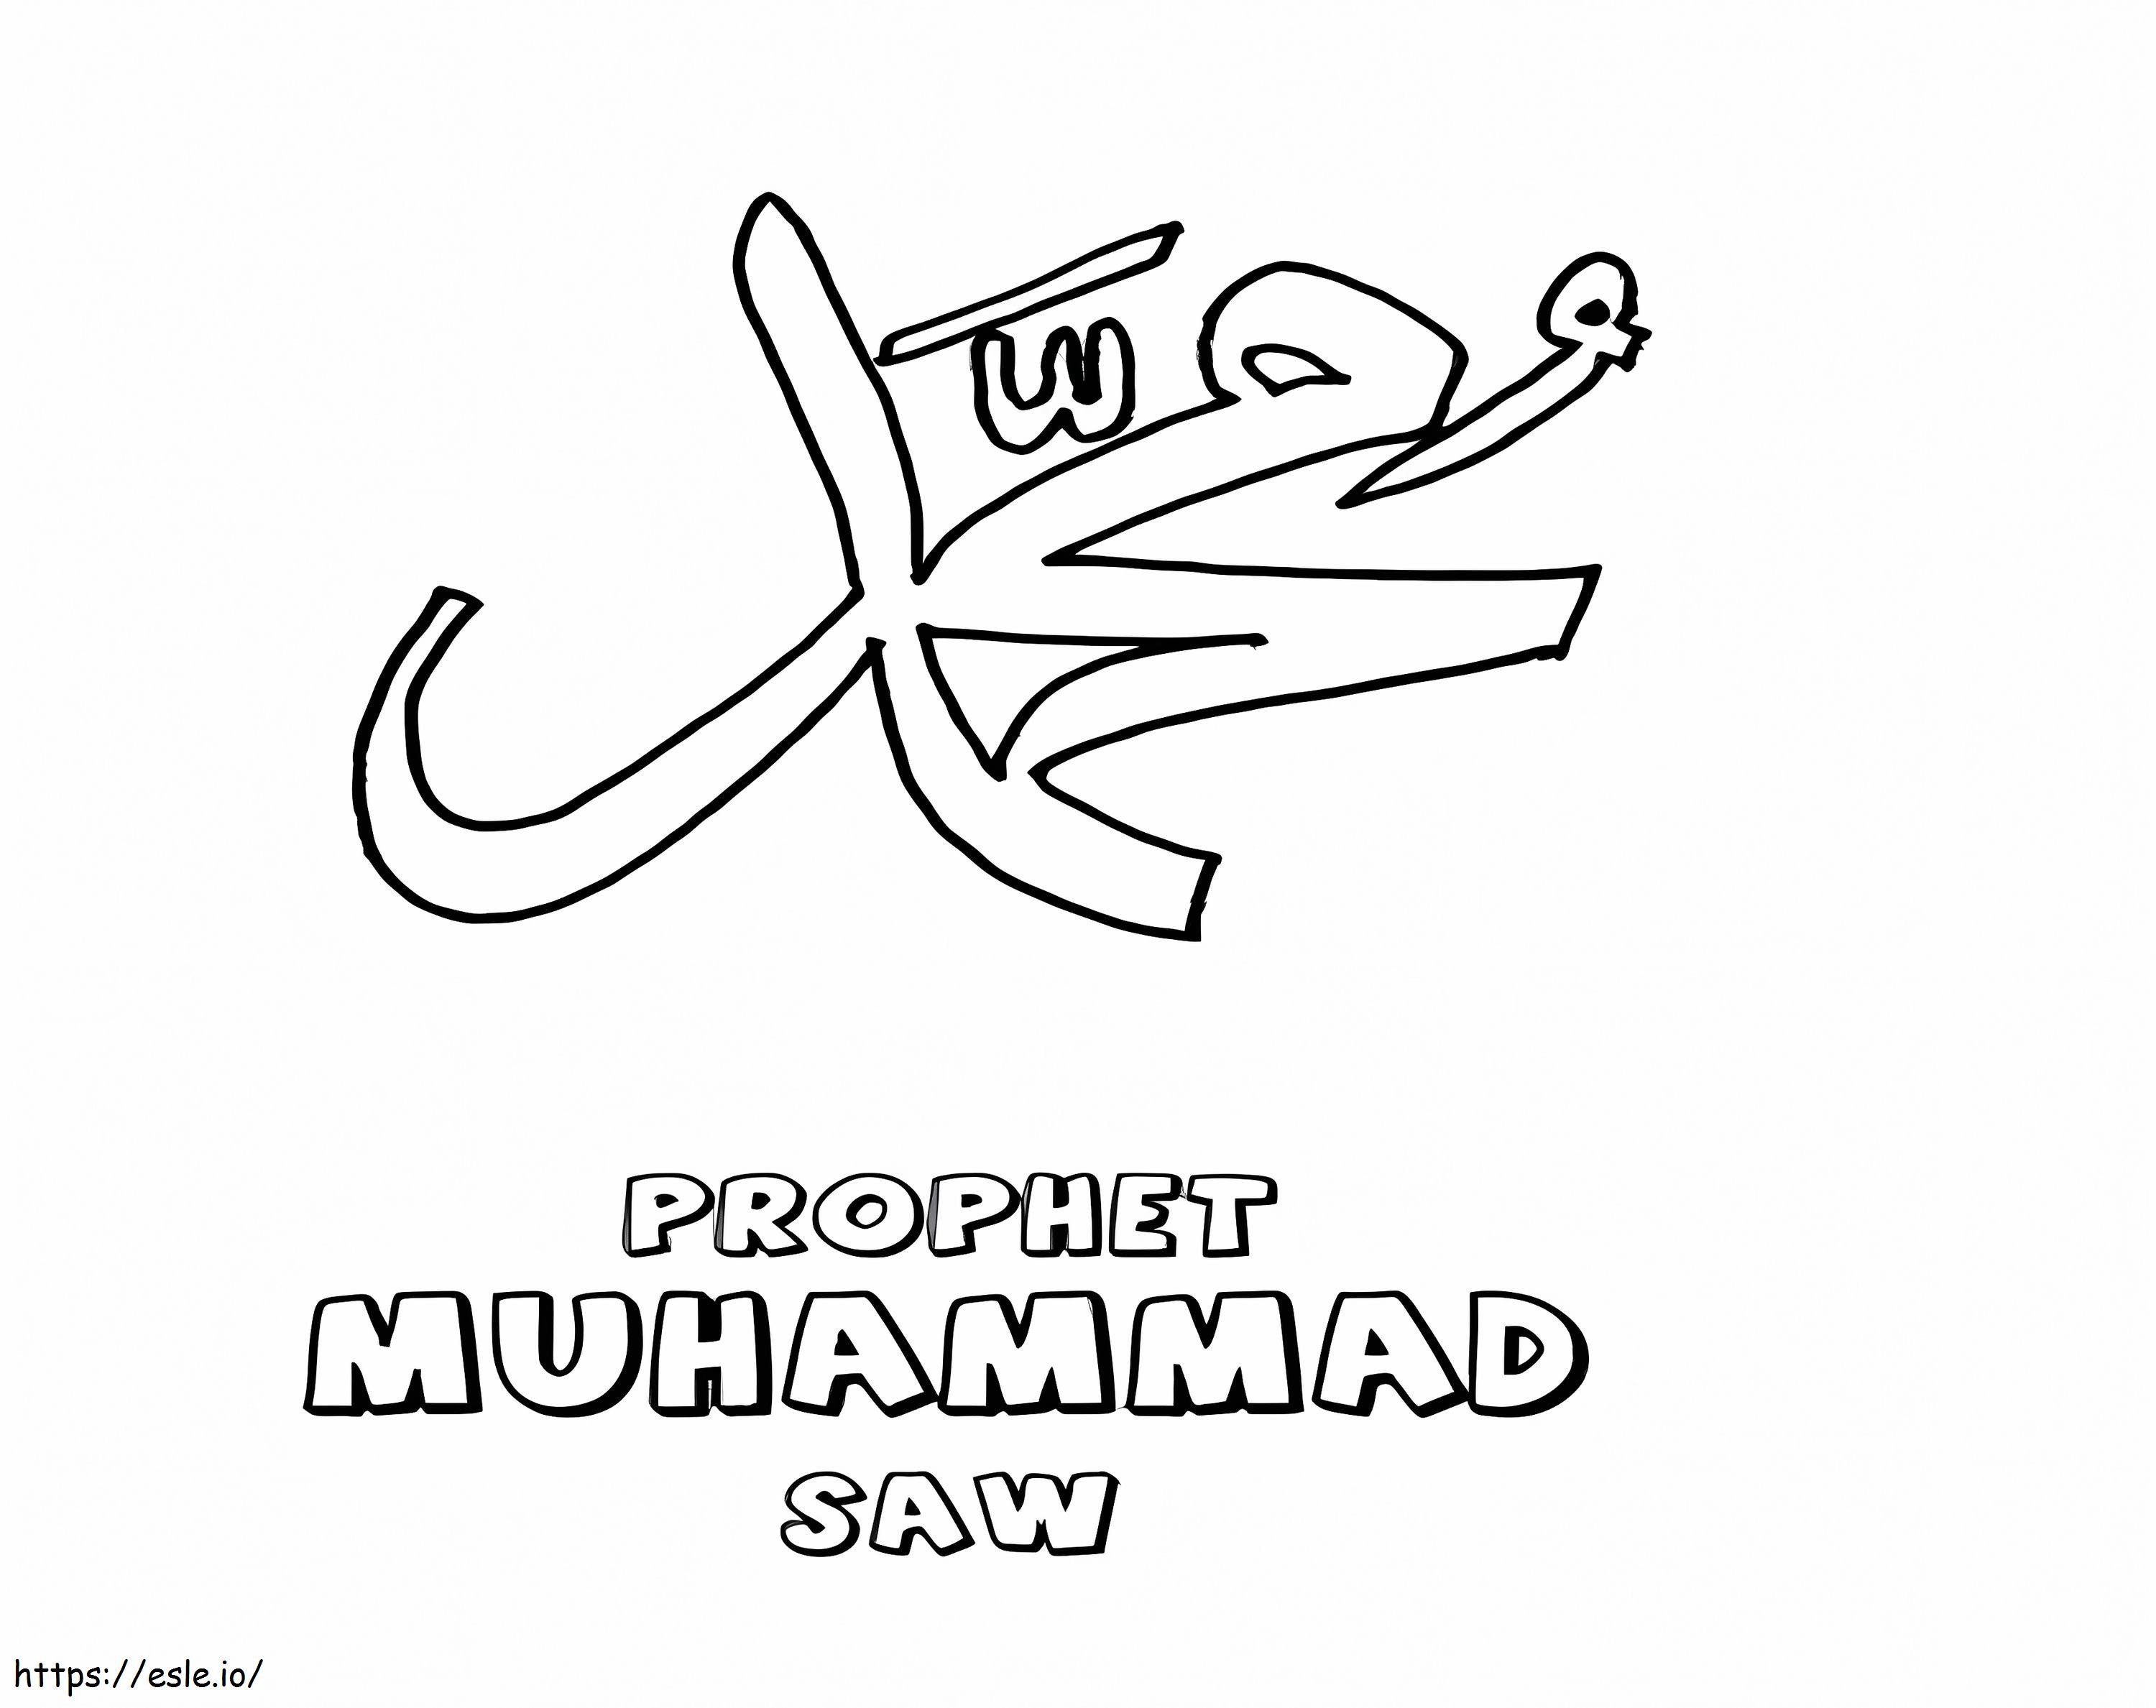 Prophet Muhammad Saw coloring page